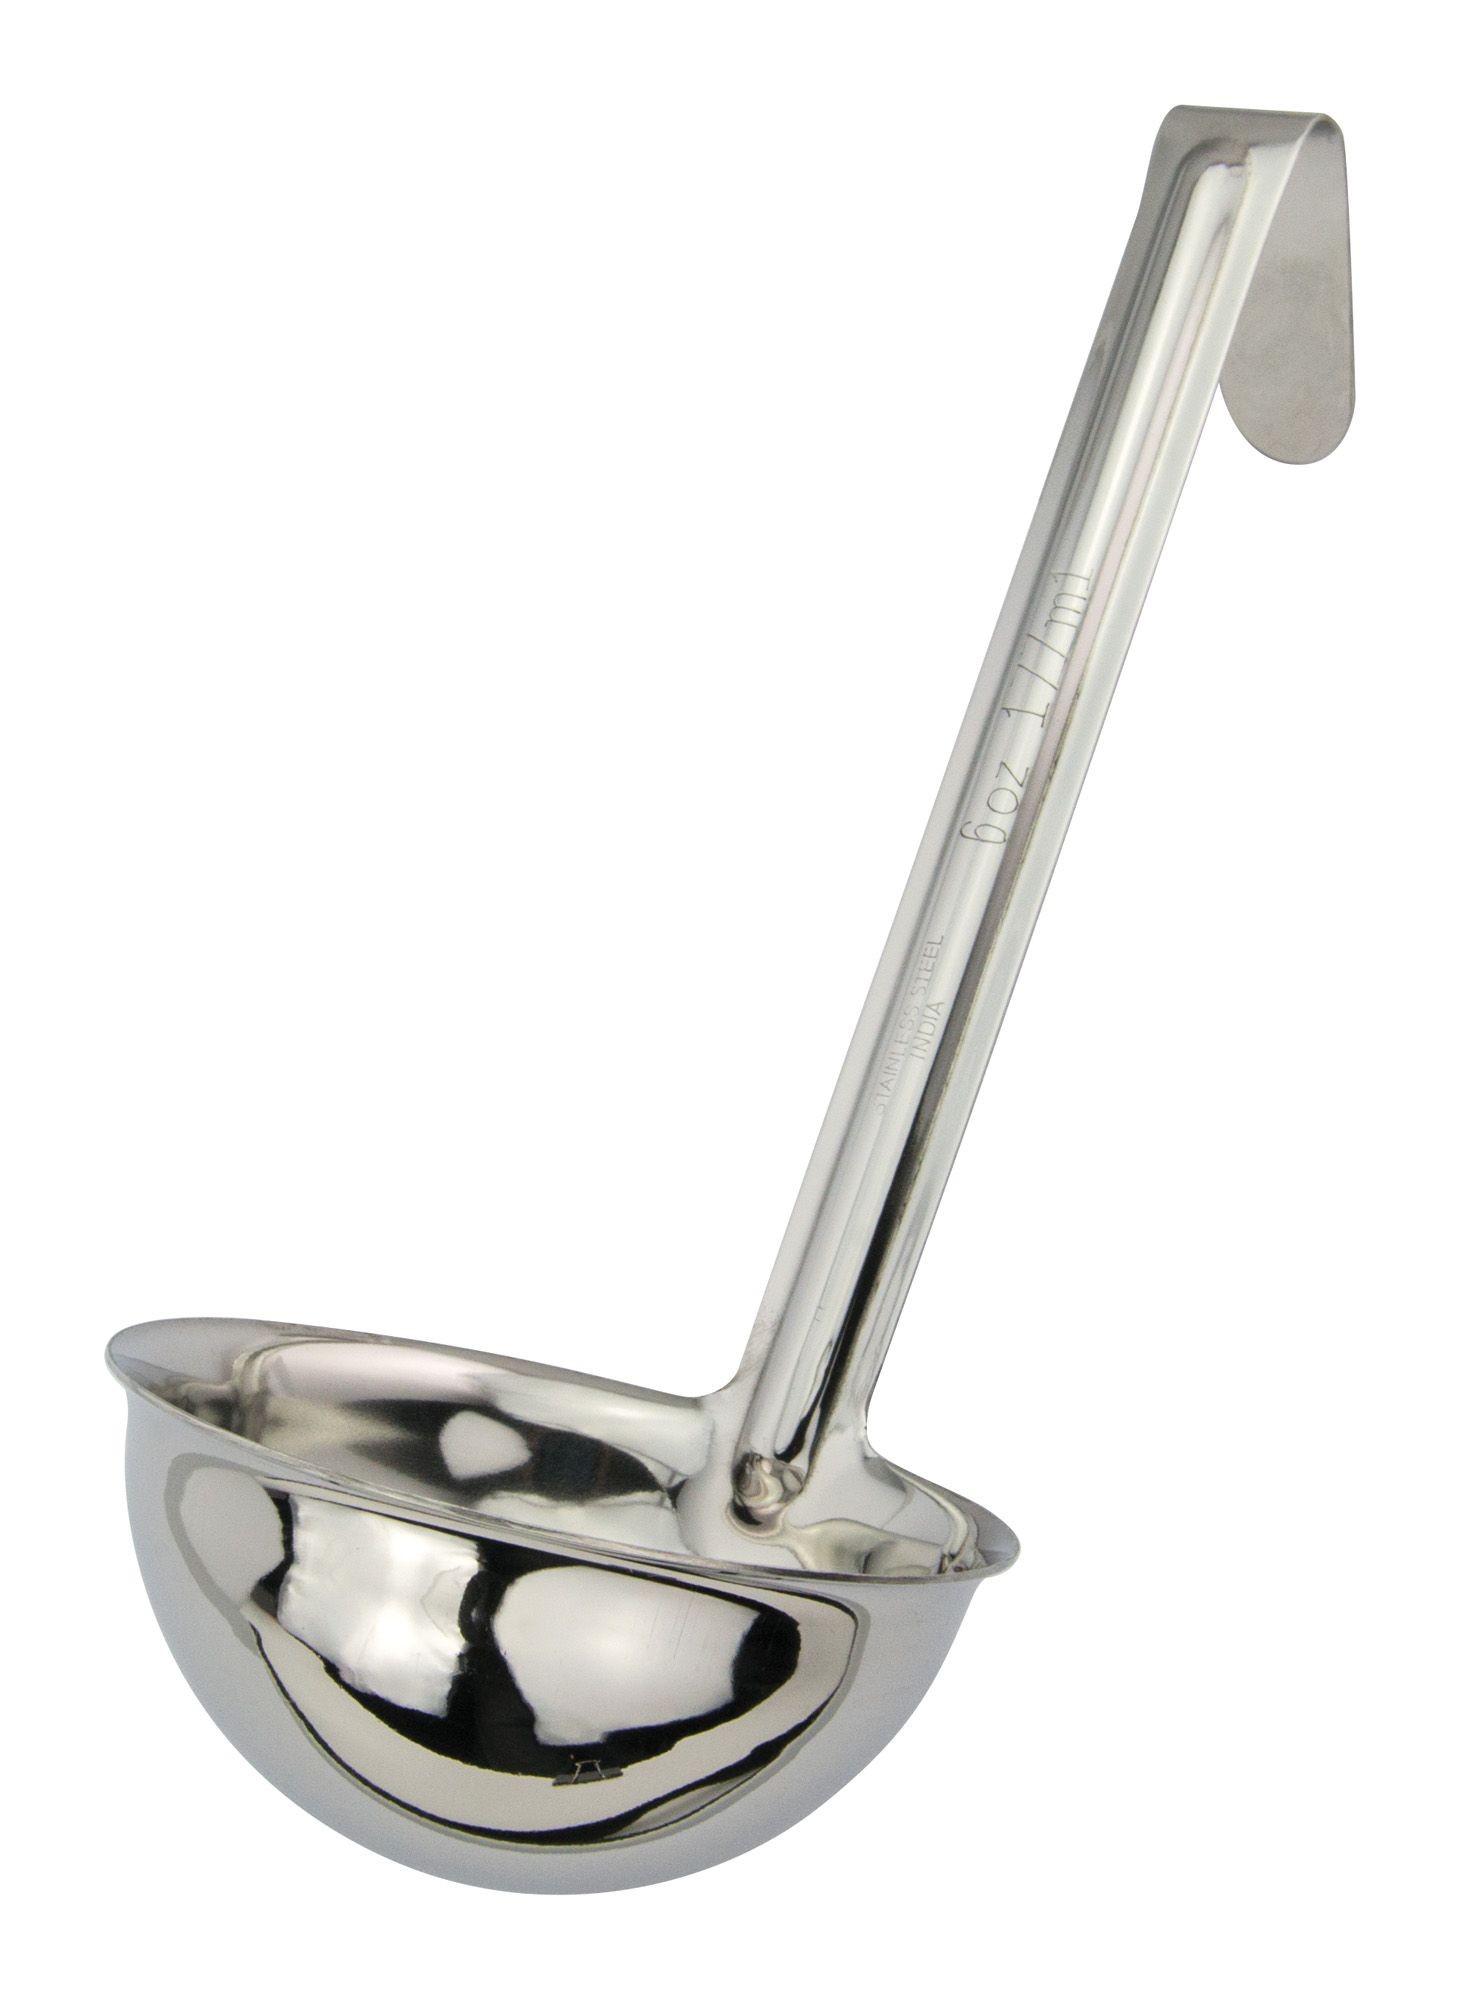 Winco LDI-60SH Stainless Steel One-Piece Short Handle Ladle 6 oz.